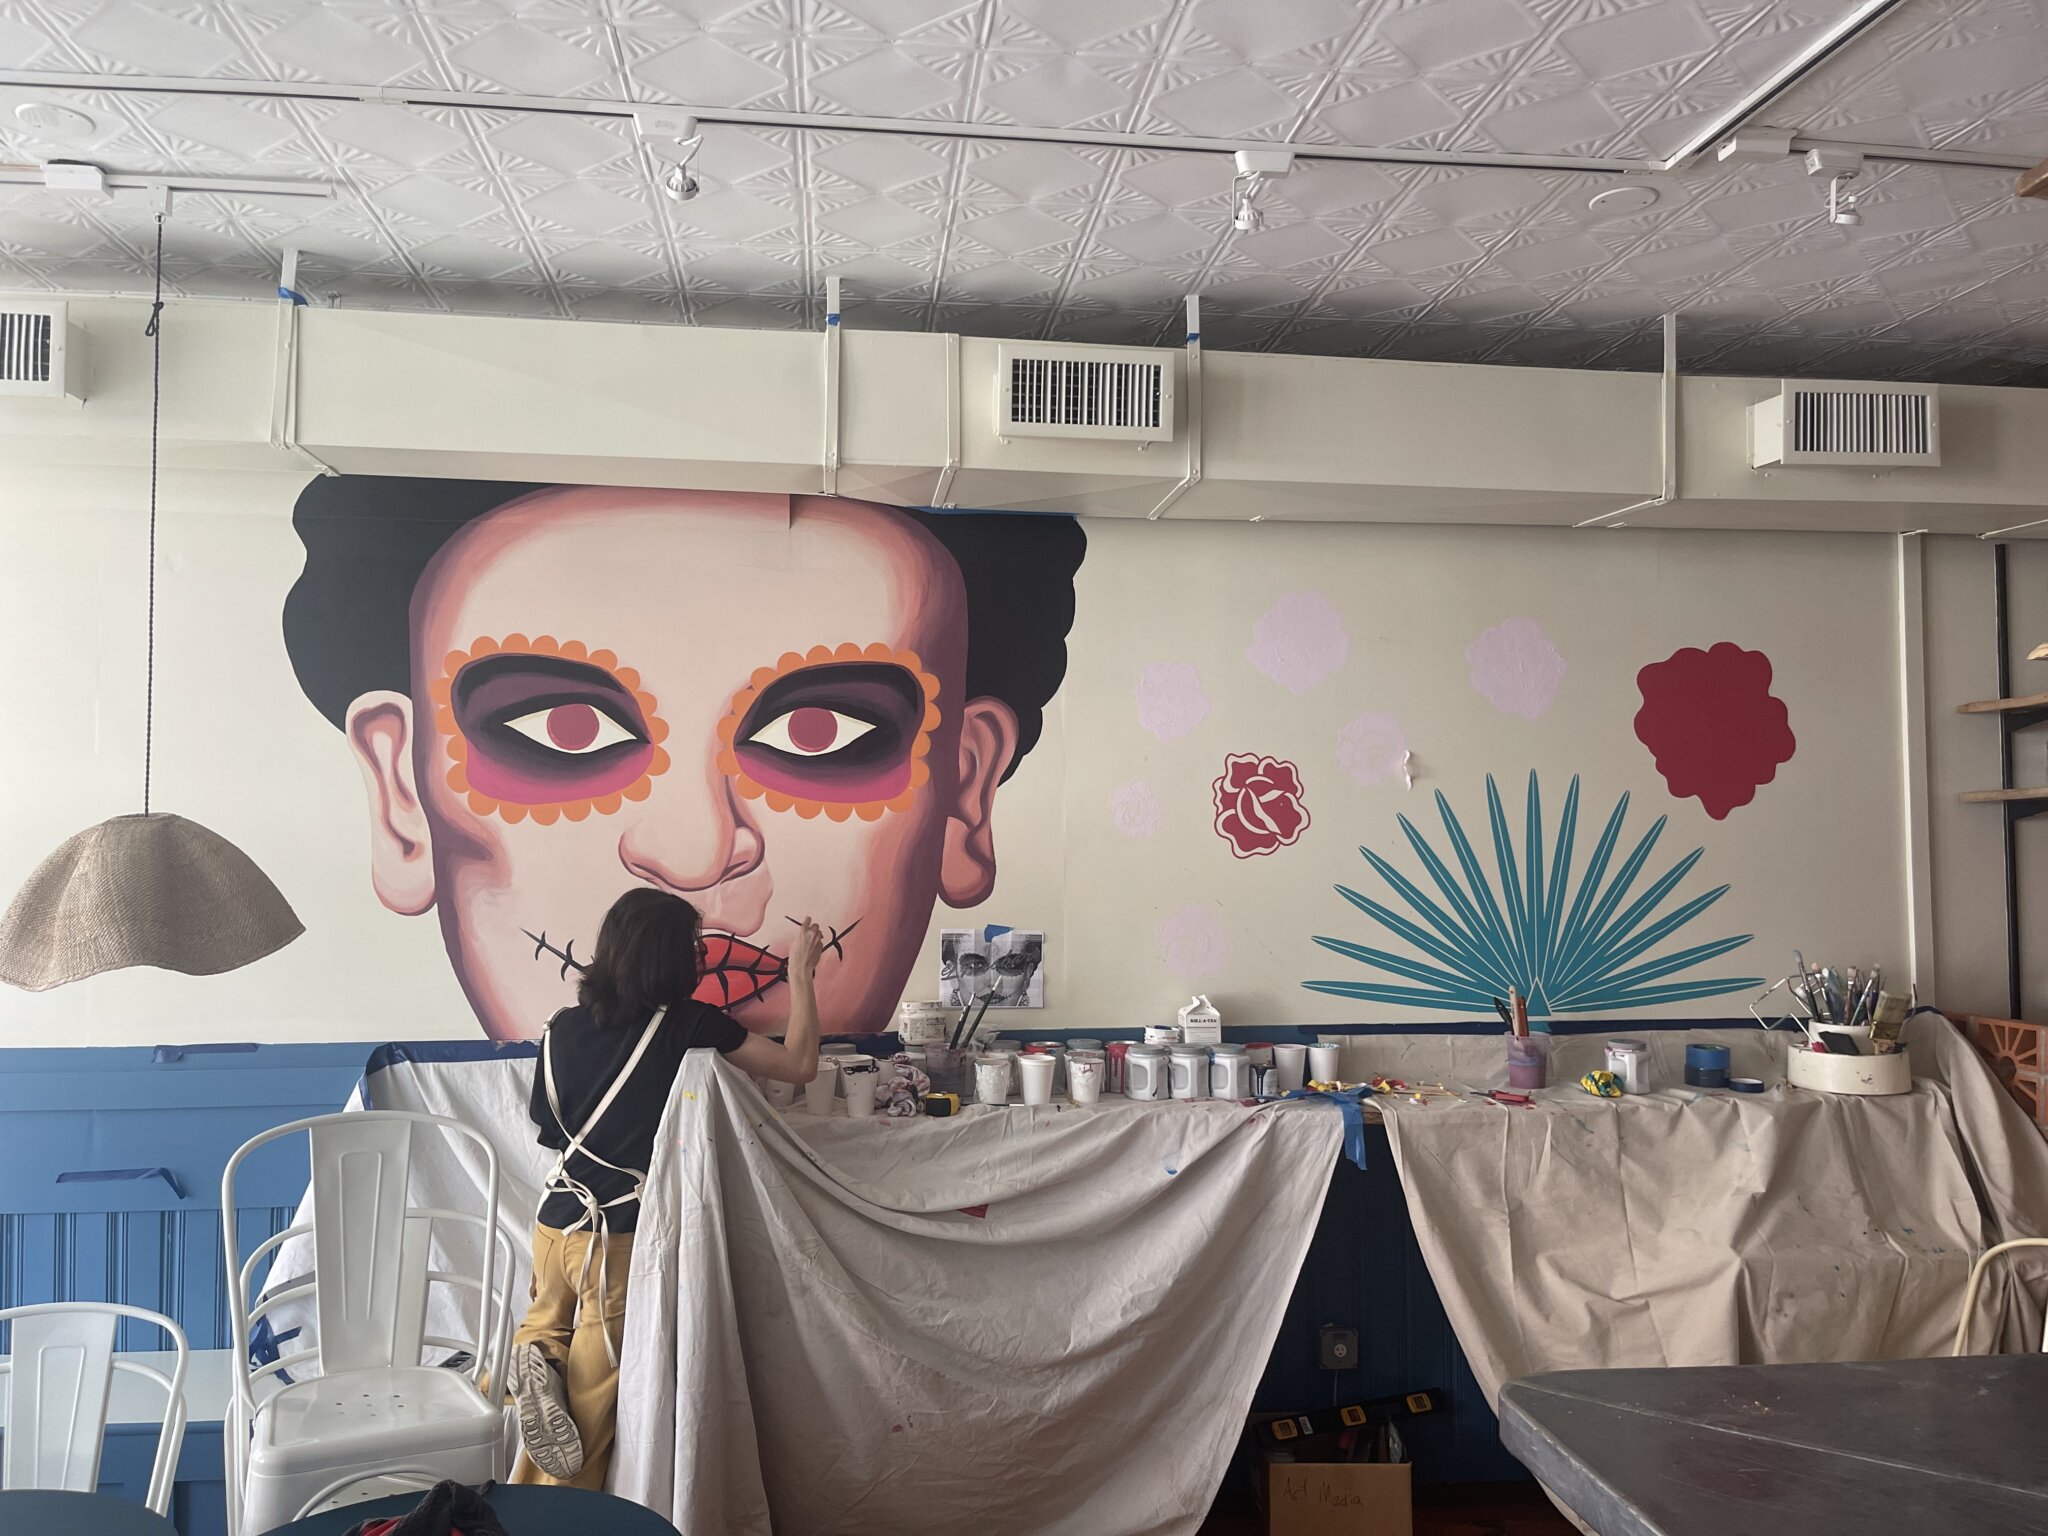 The creation of MAGO's mural at eLTacobar